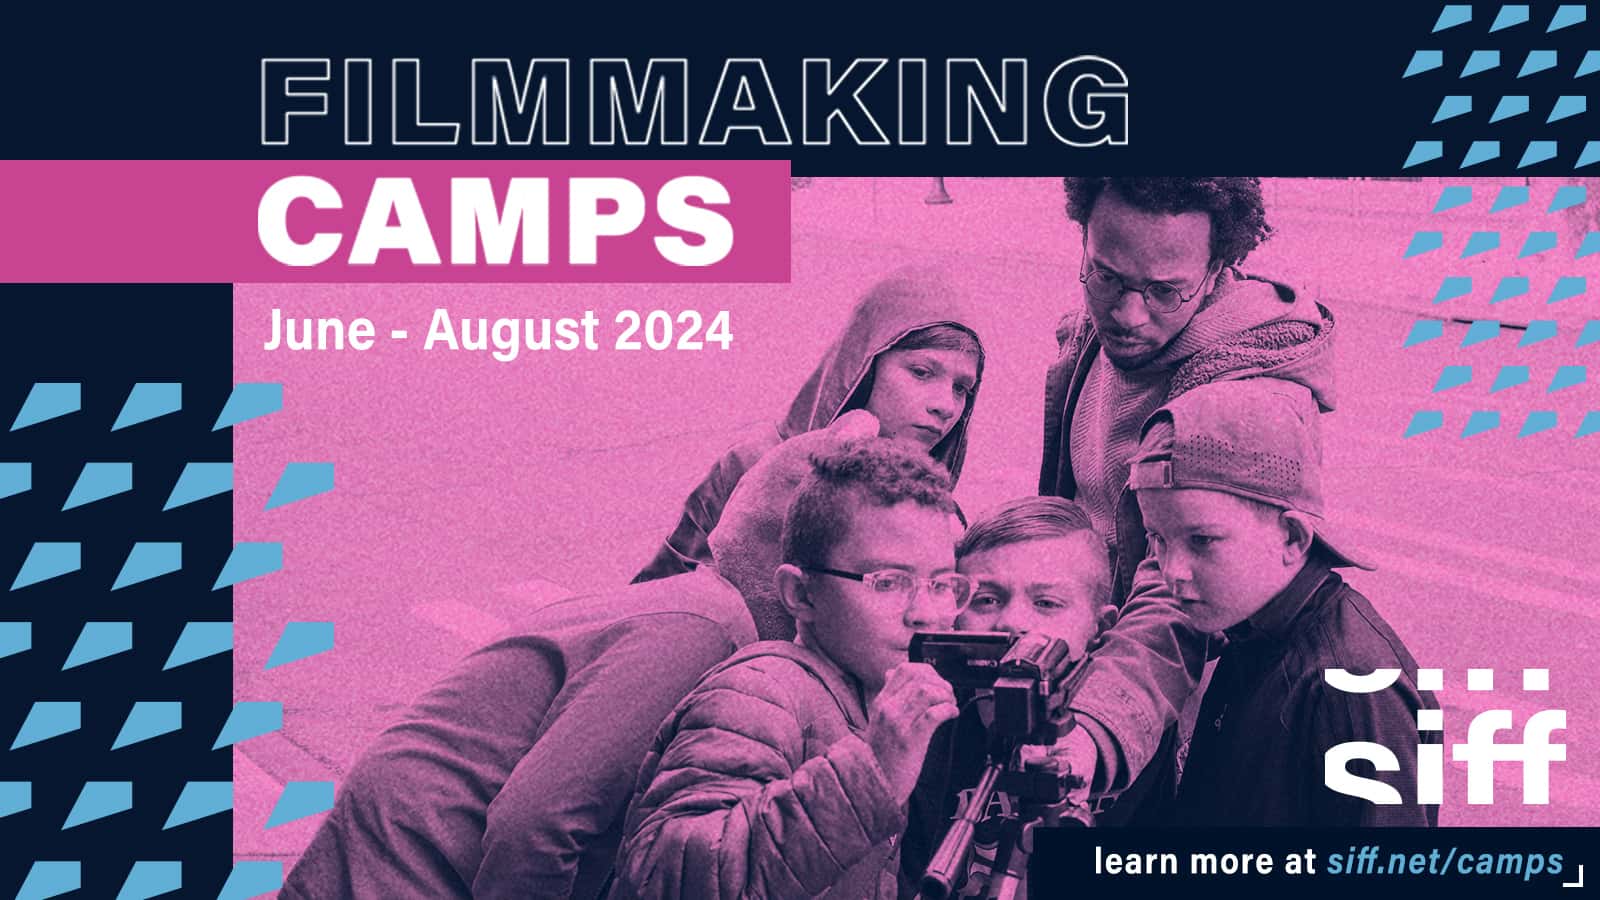 SIFF Filmmaking Camps